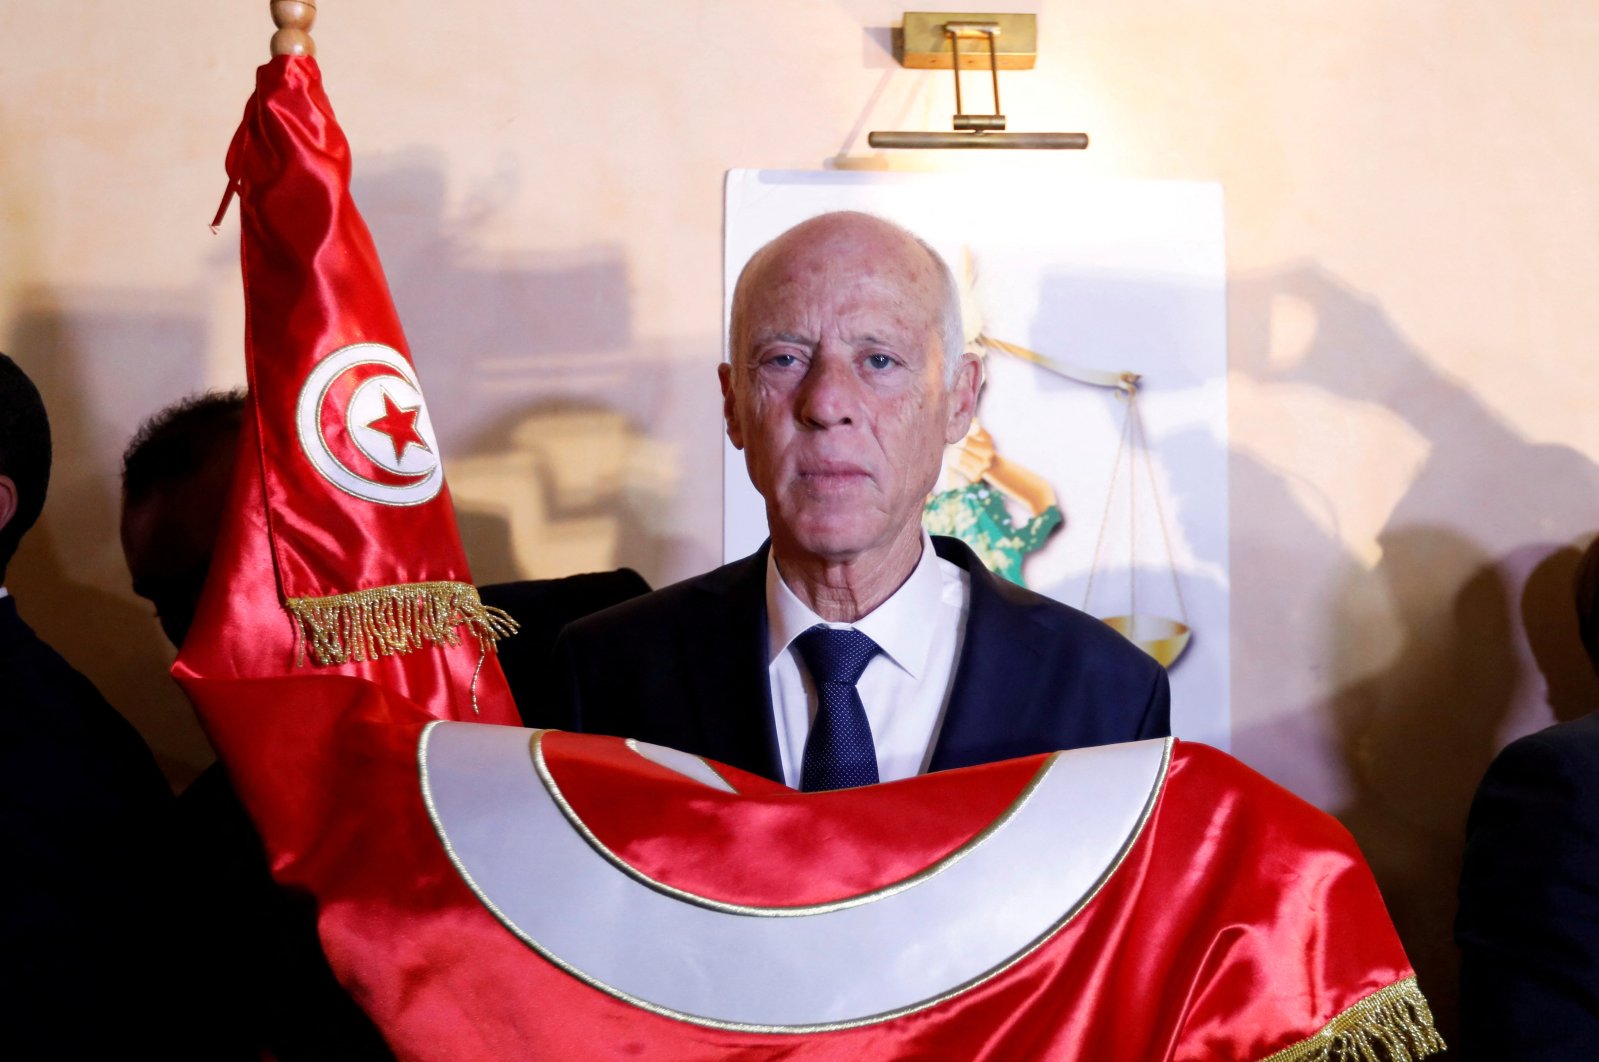  Tunisian presidential candidate Kais Saied reacts after exit poll results were announced in a second-round runoff of the presidential election in Tunis, Tunisia Oct.13, 2019. (Reuters File Photo)